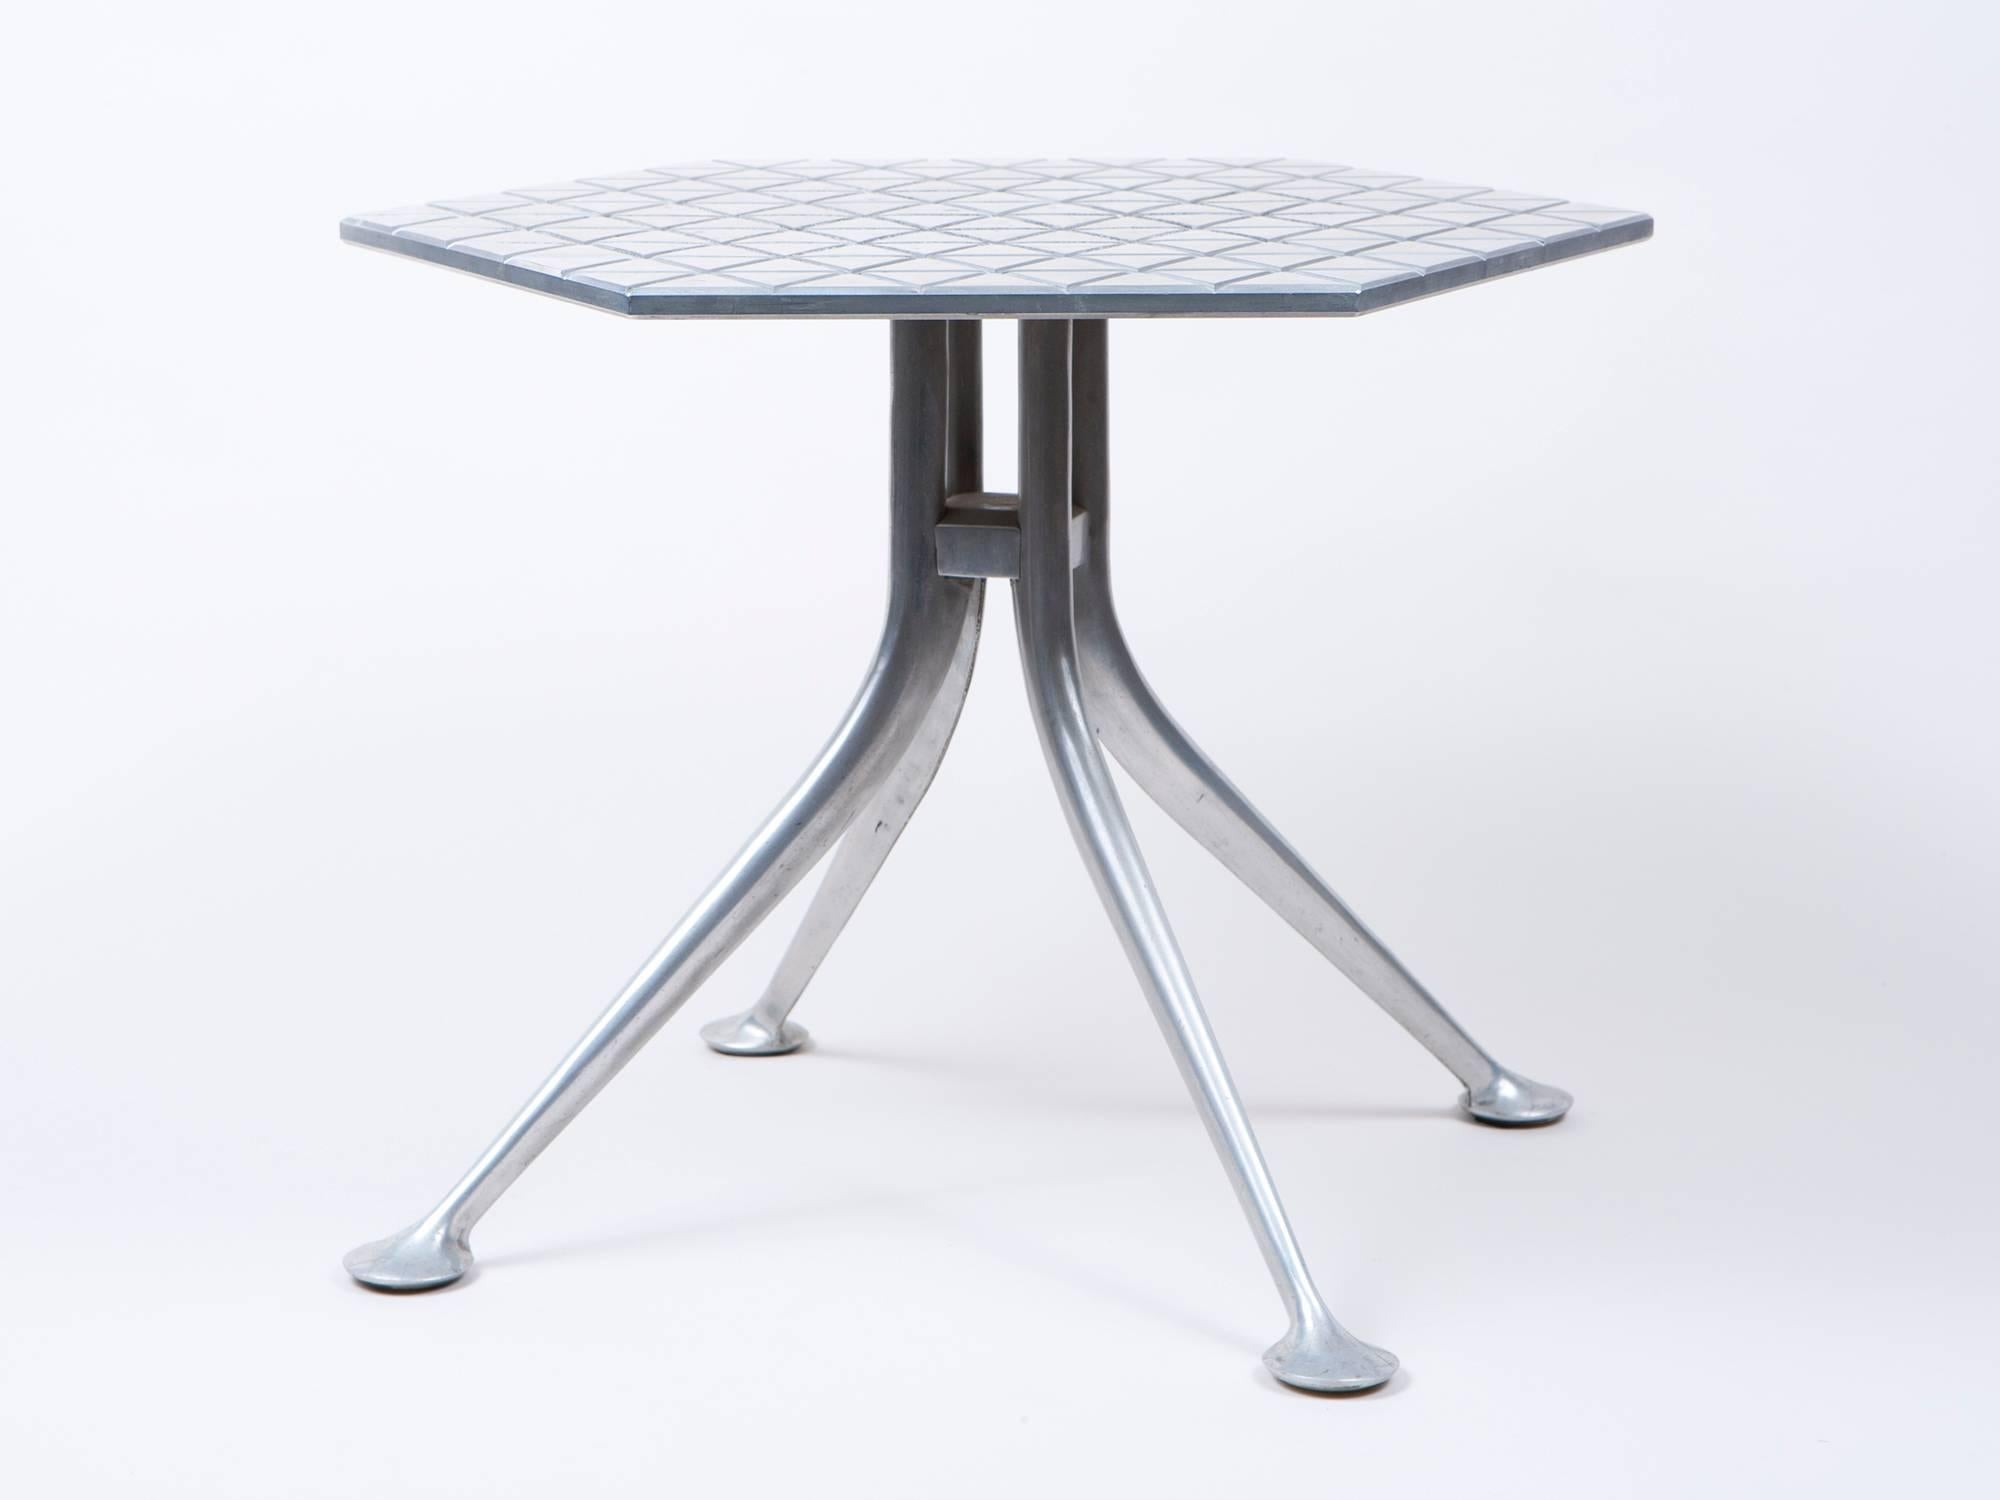 Rare cast and polished aluminium hexagonal table by Alexander Girard designed for Herman Miller and Braniff Airlines.
 